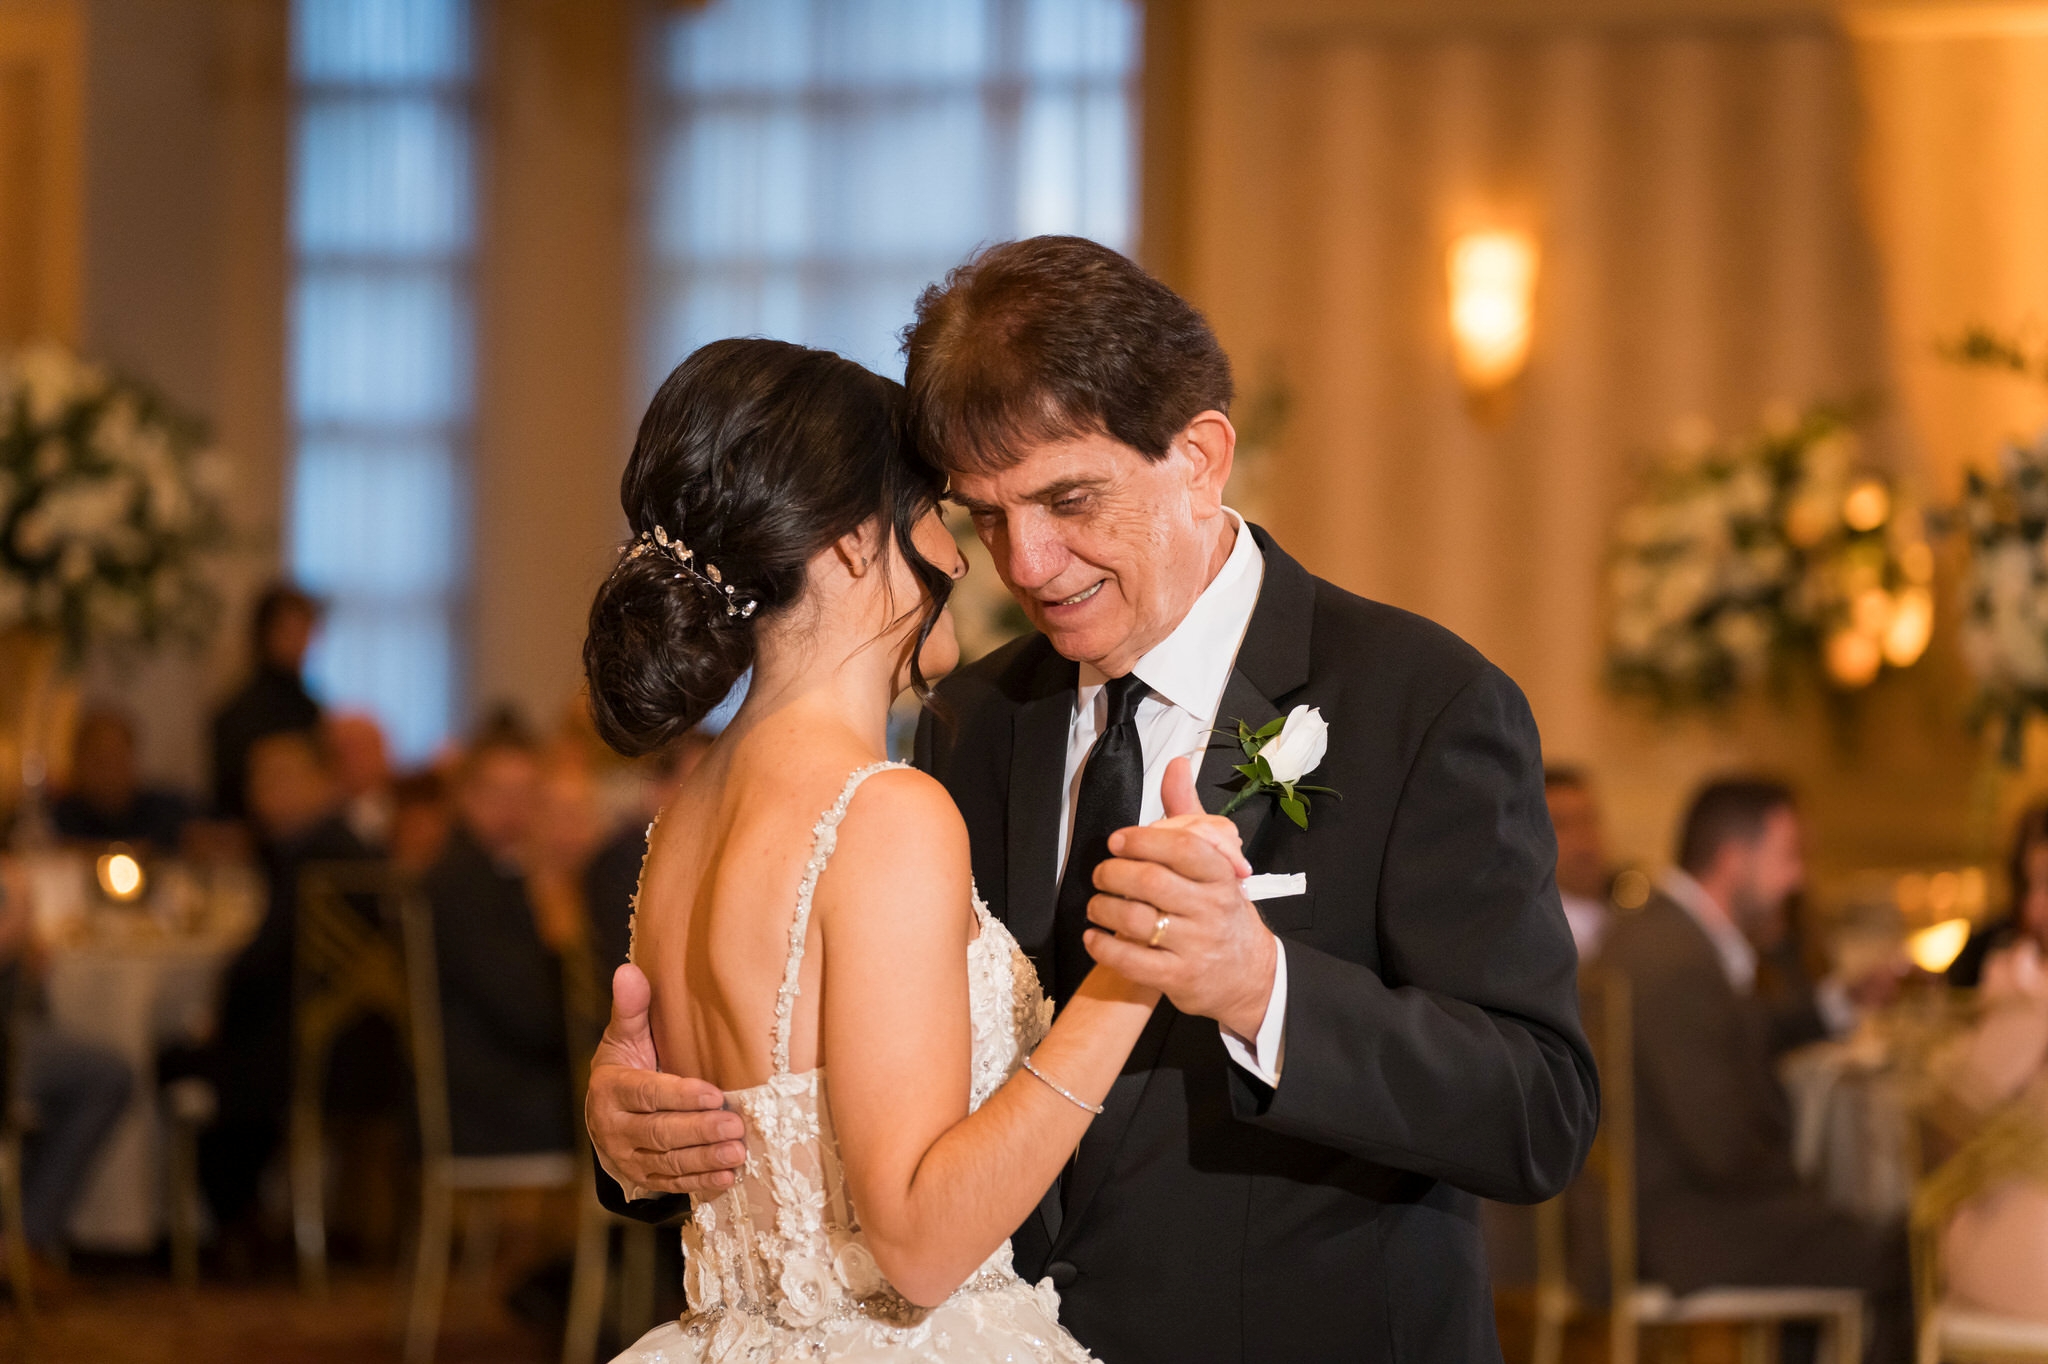 A bride dances with her dad during her wedding reception at Palazzo Grande.  